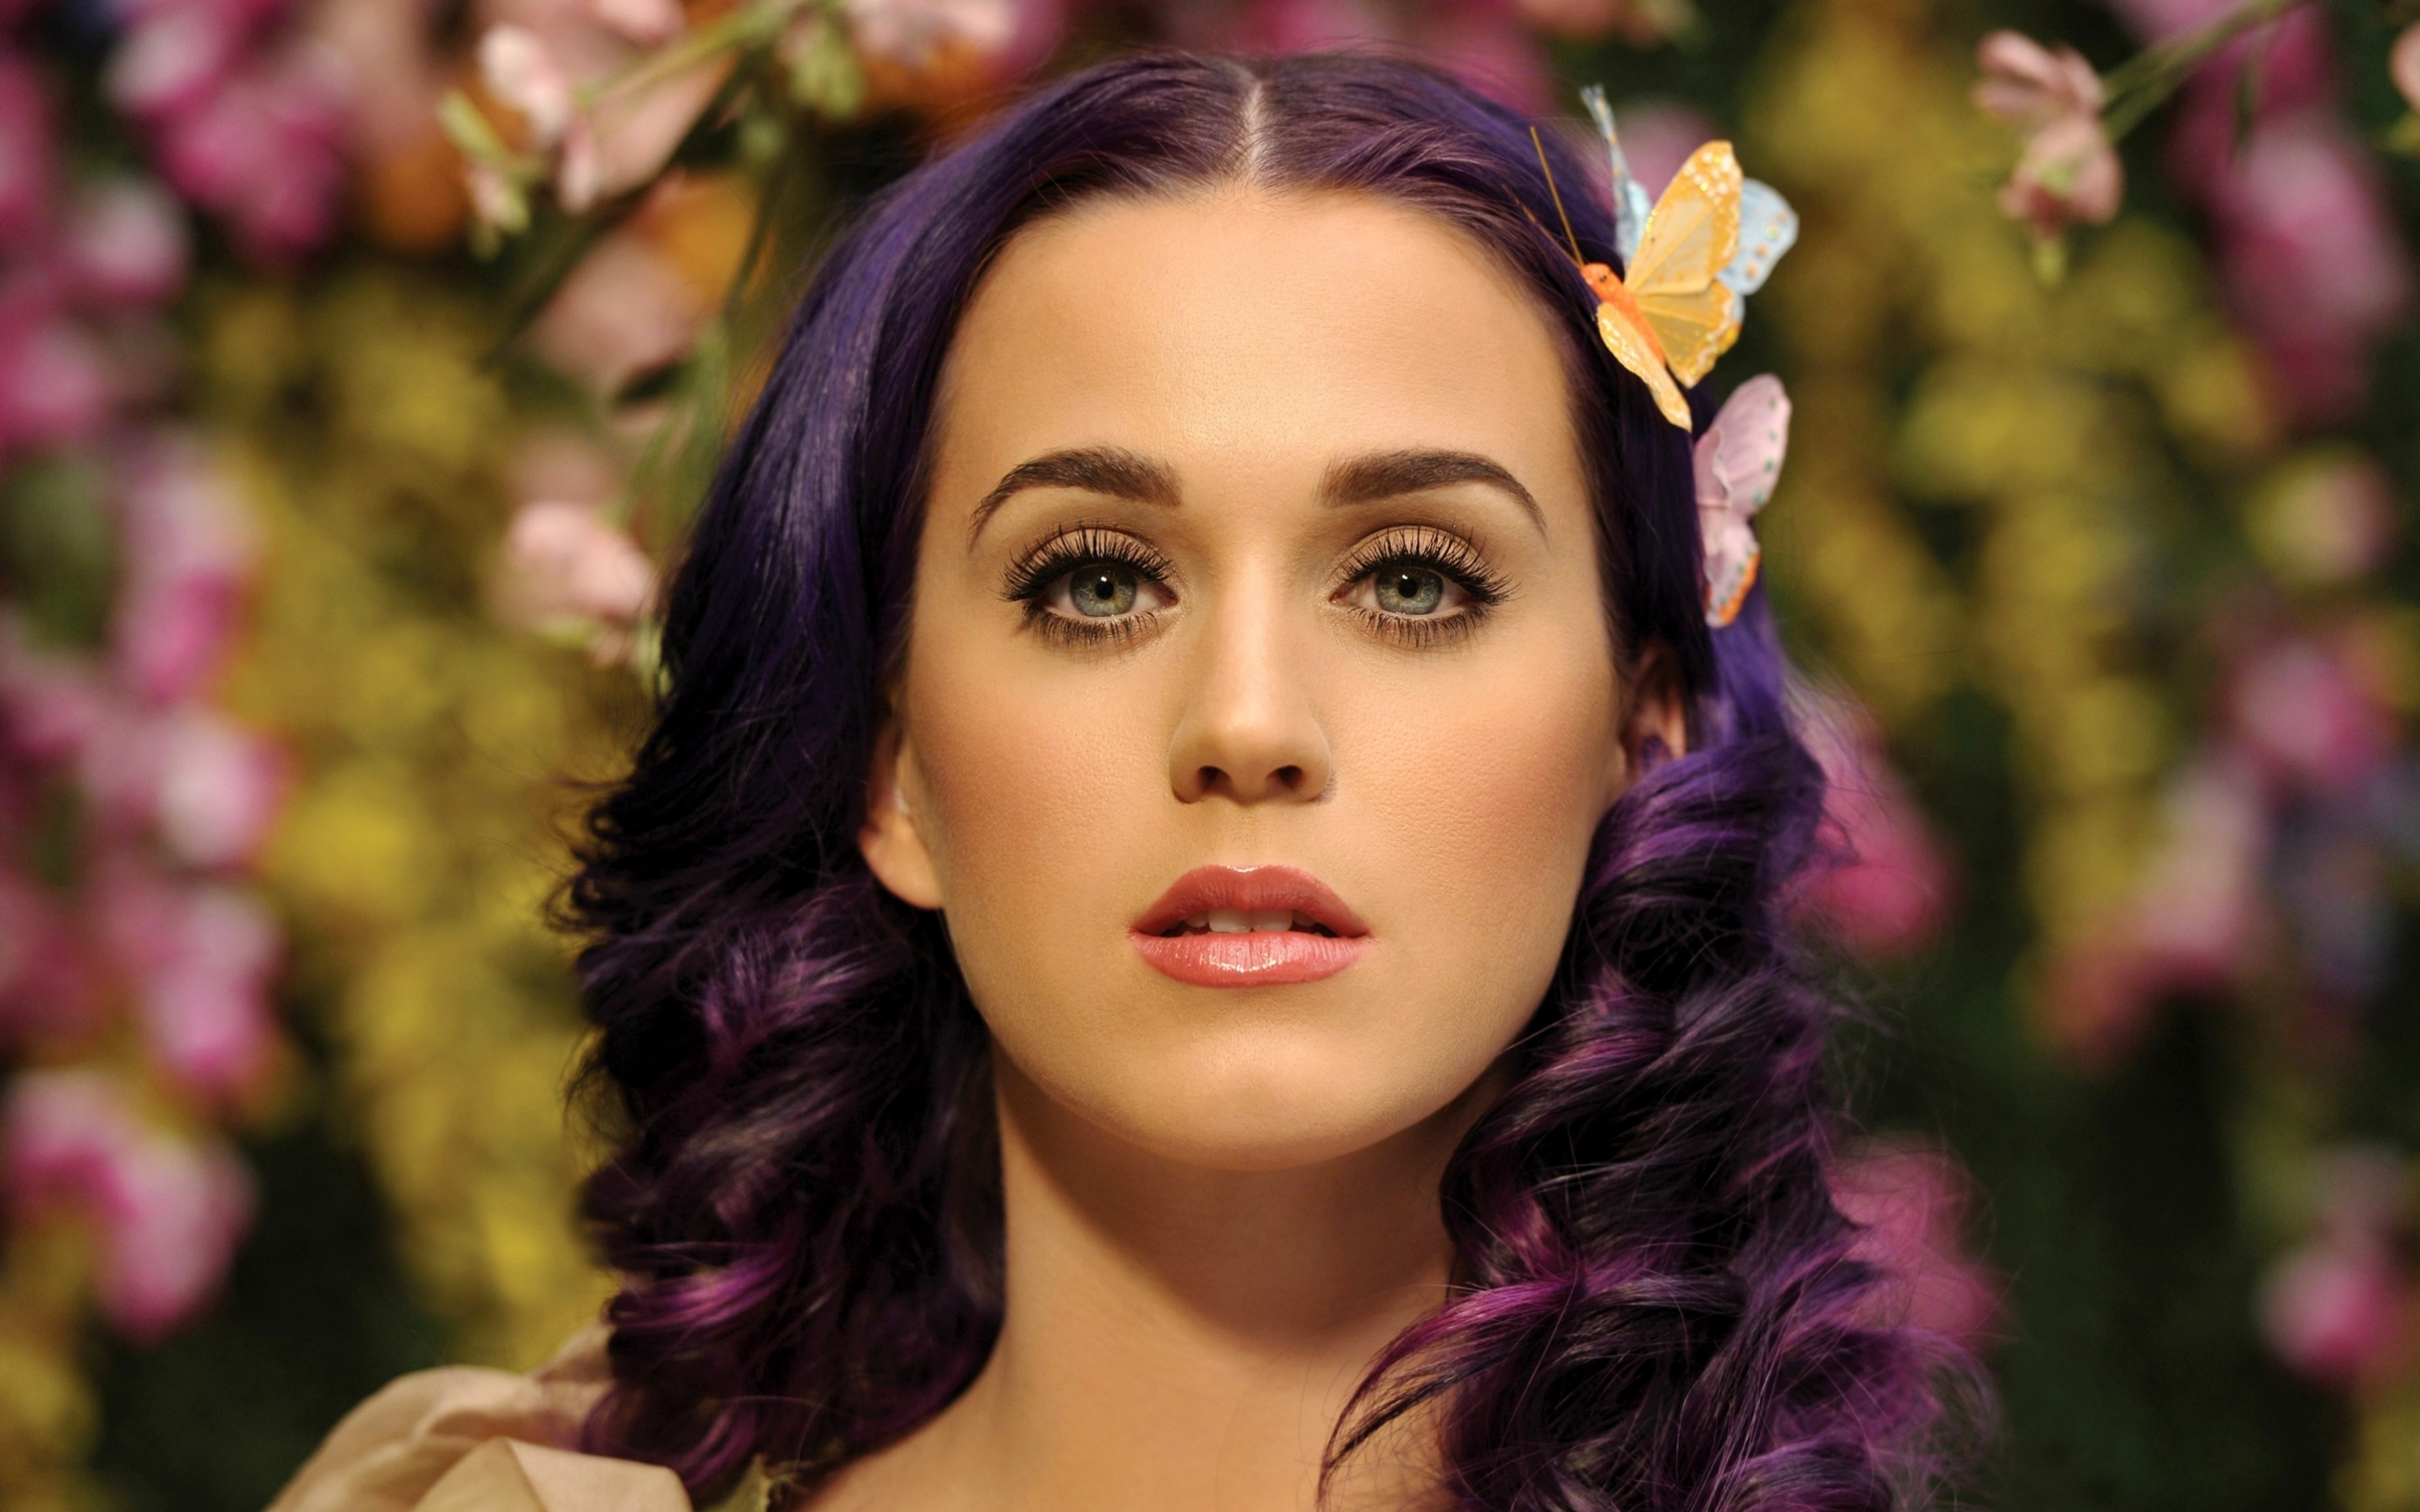 Katy Perry, colored hair, singer, 2018, 2880x1800 wallpaper